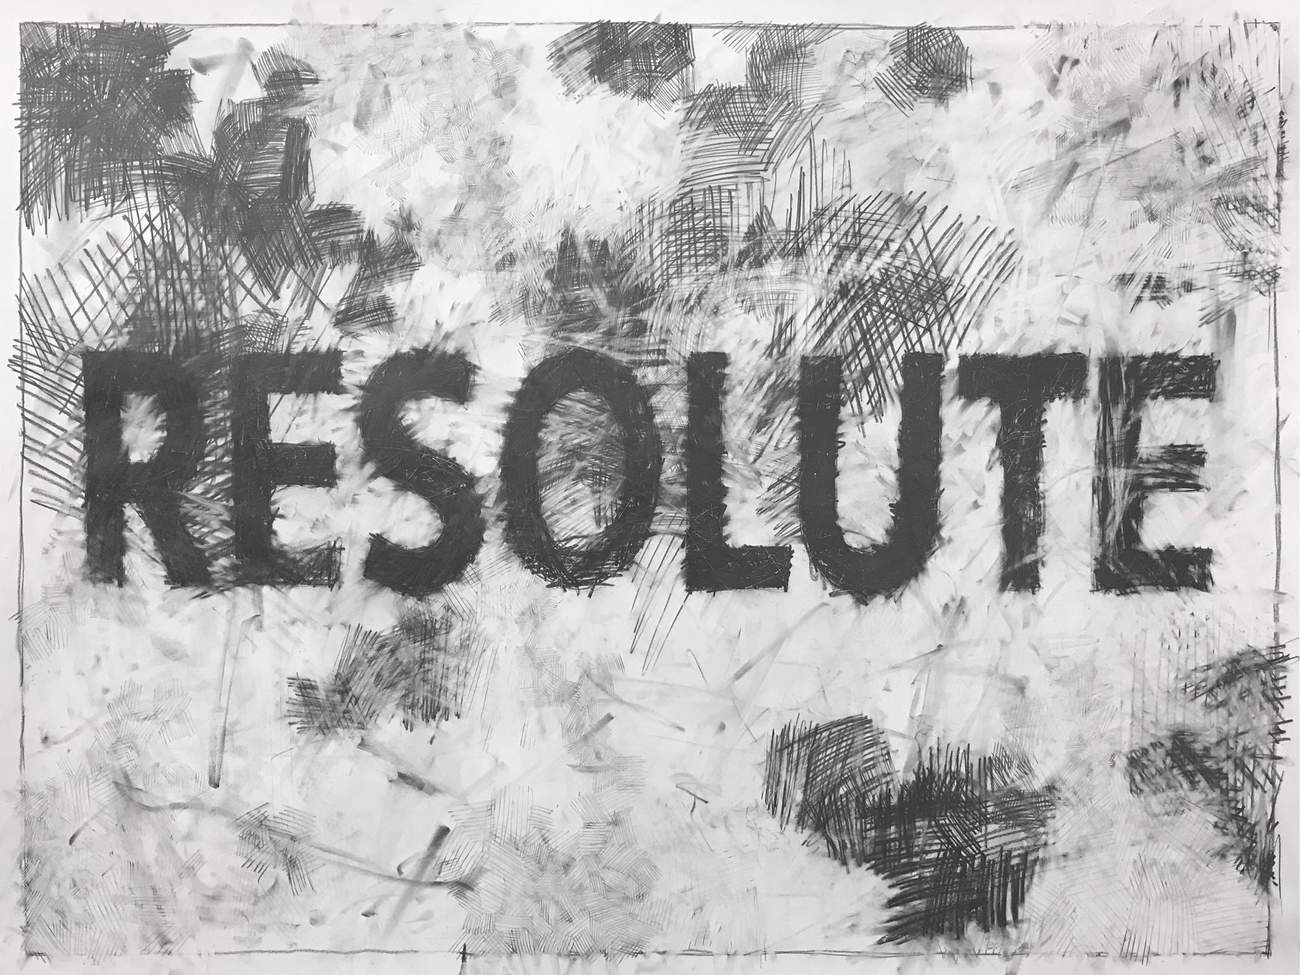 Preview image for Meditation II: Resolute